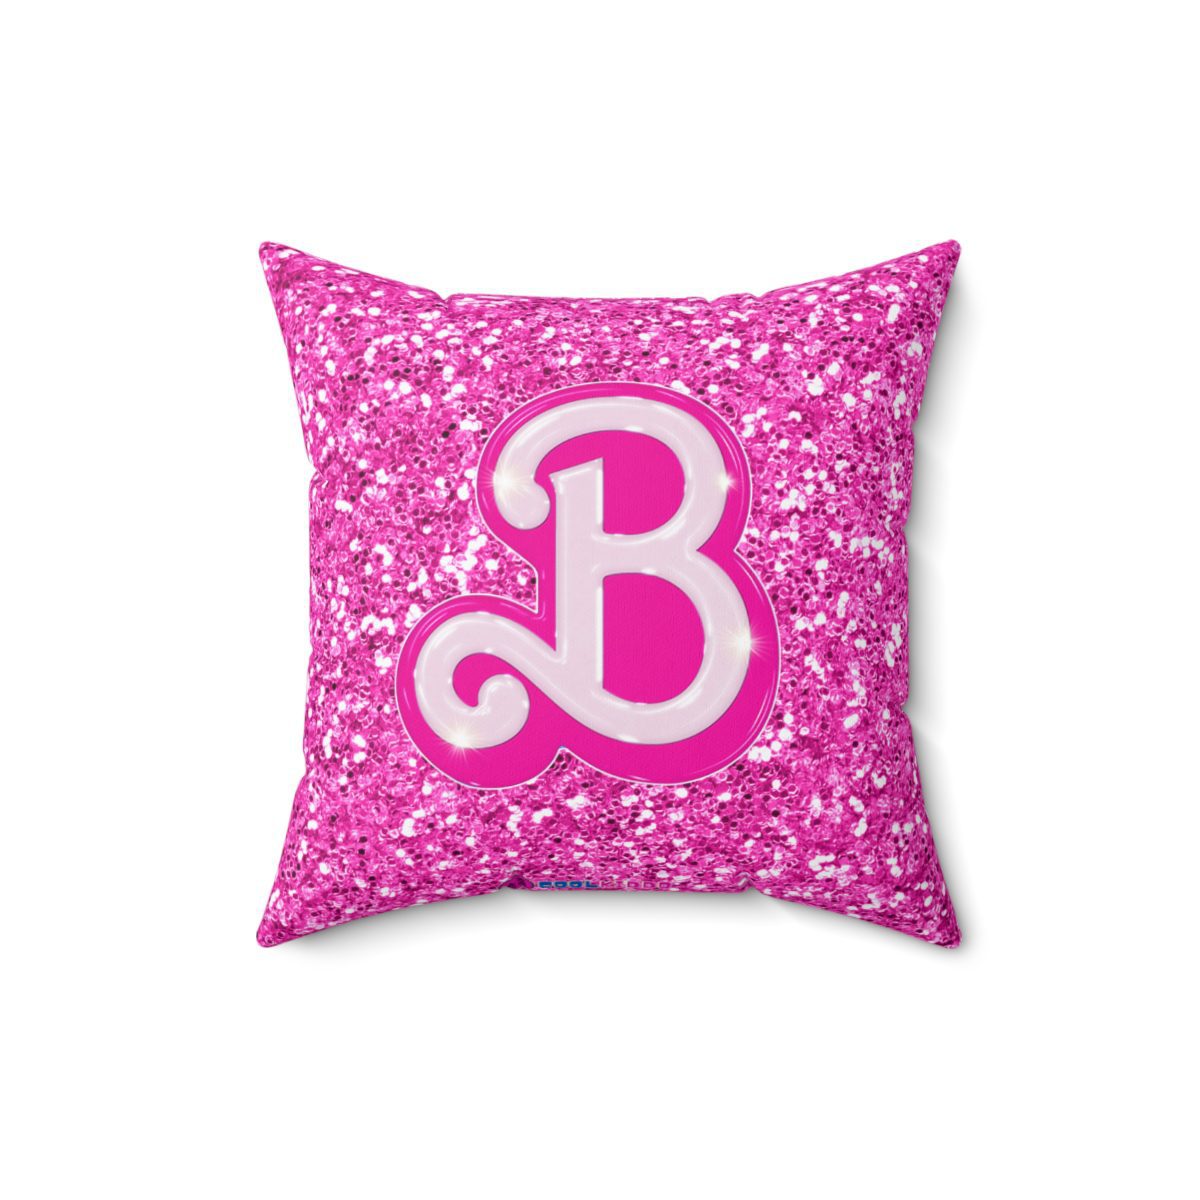 Barbie Glitter Simulation Pink Cushion: Double-Sided Sparkle for Stylish Comfort Cool Kiddo 18